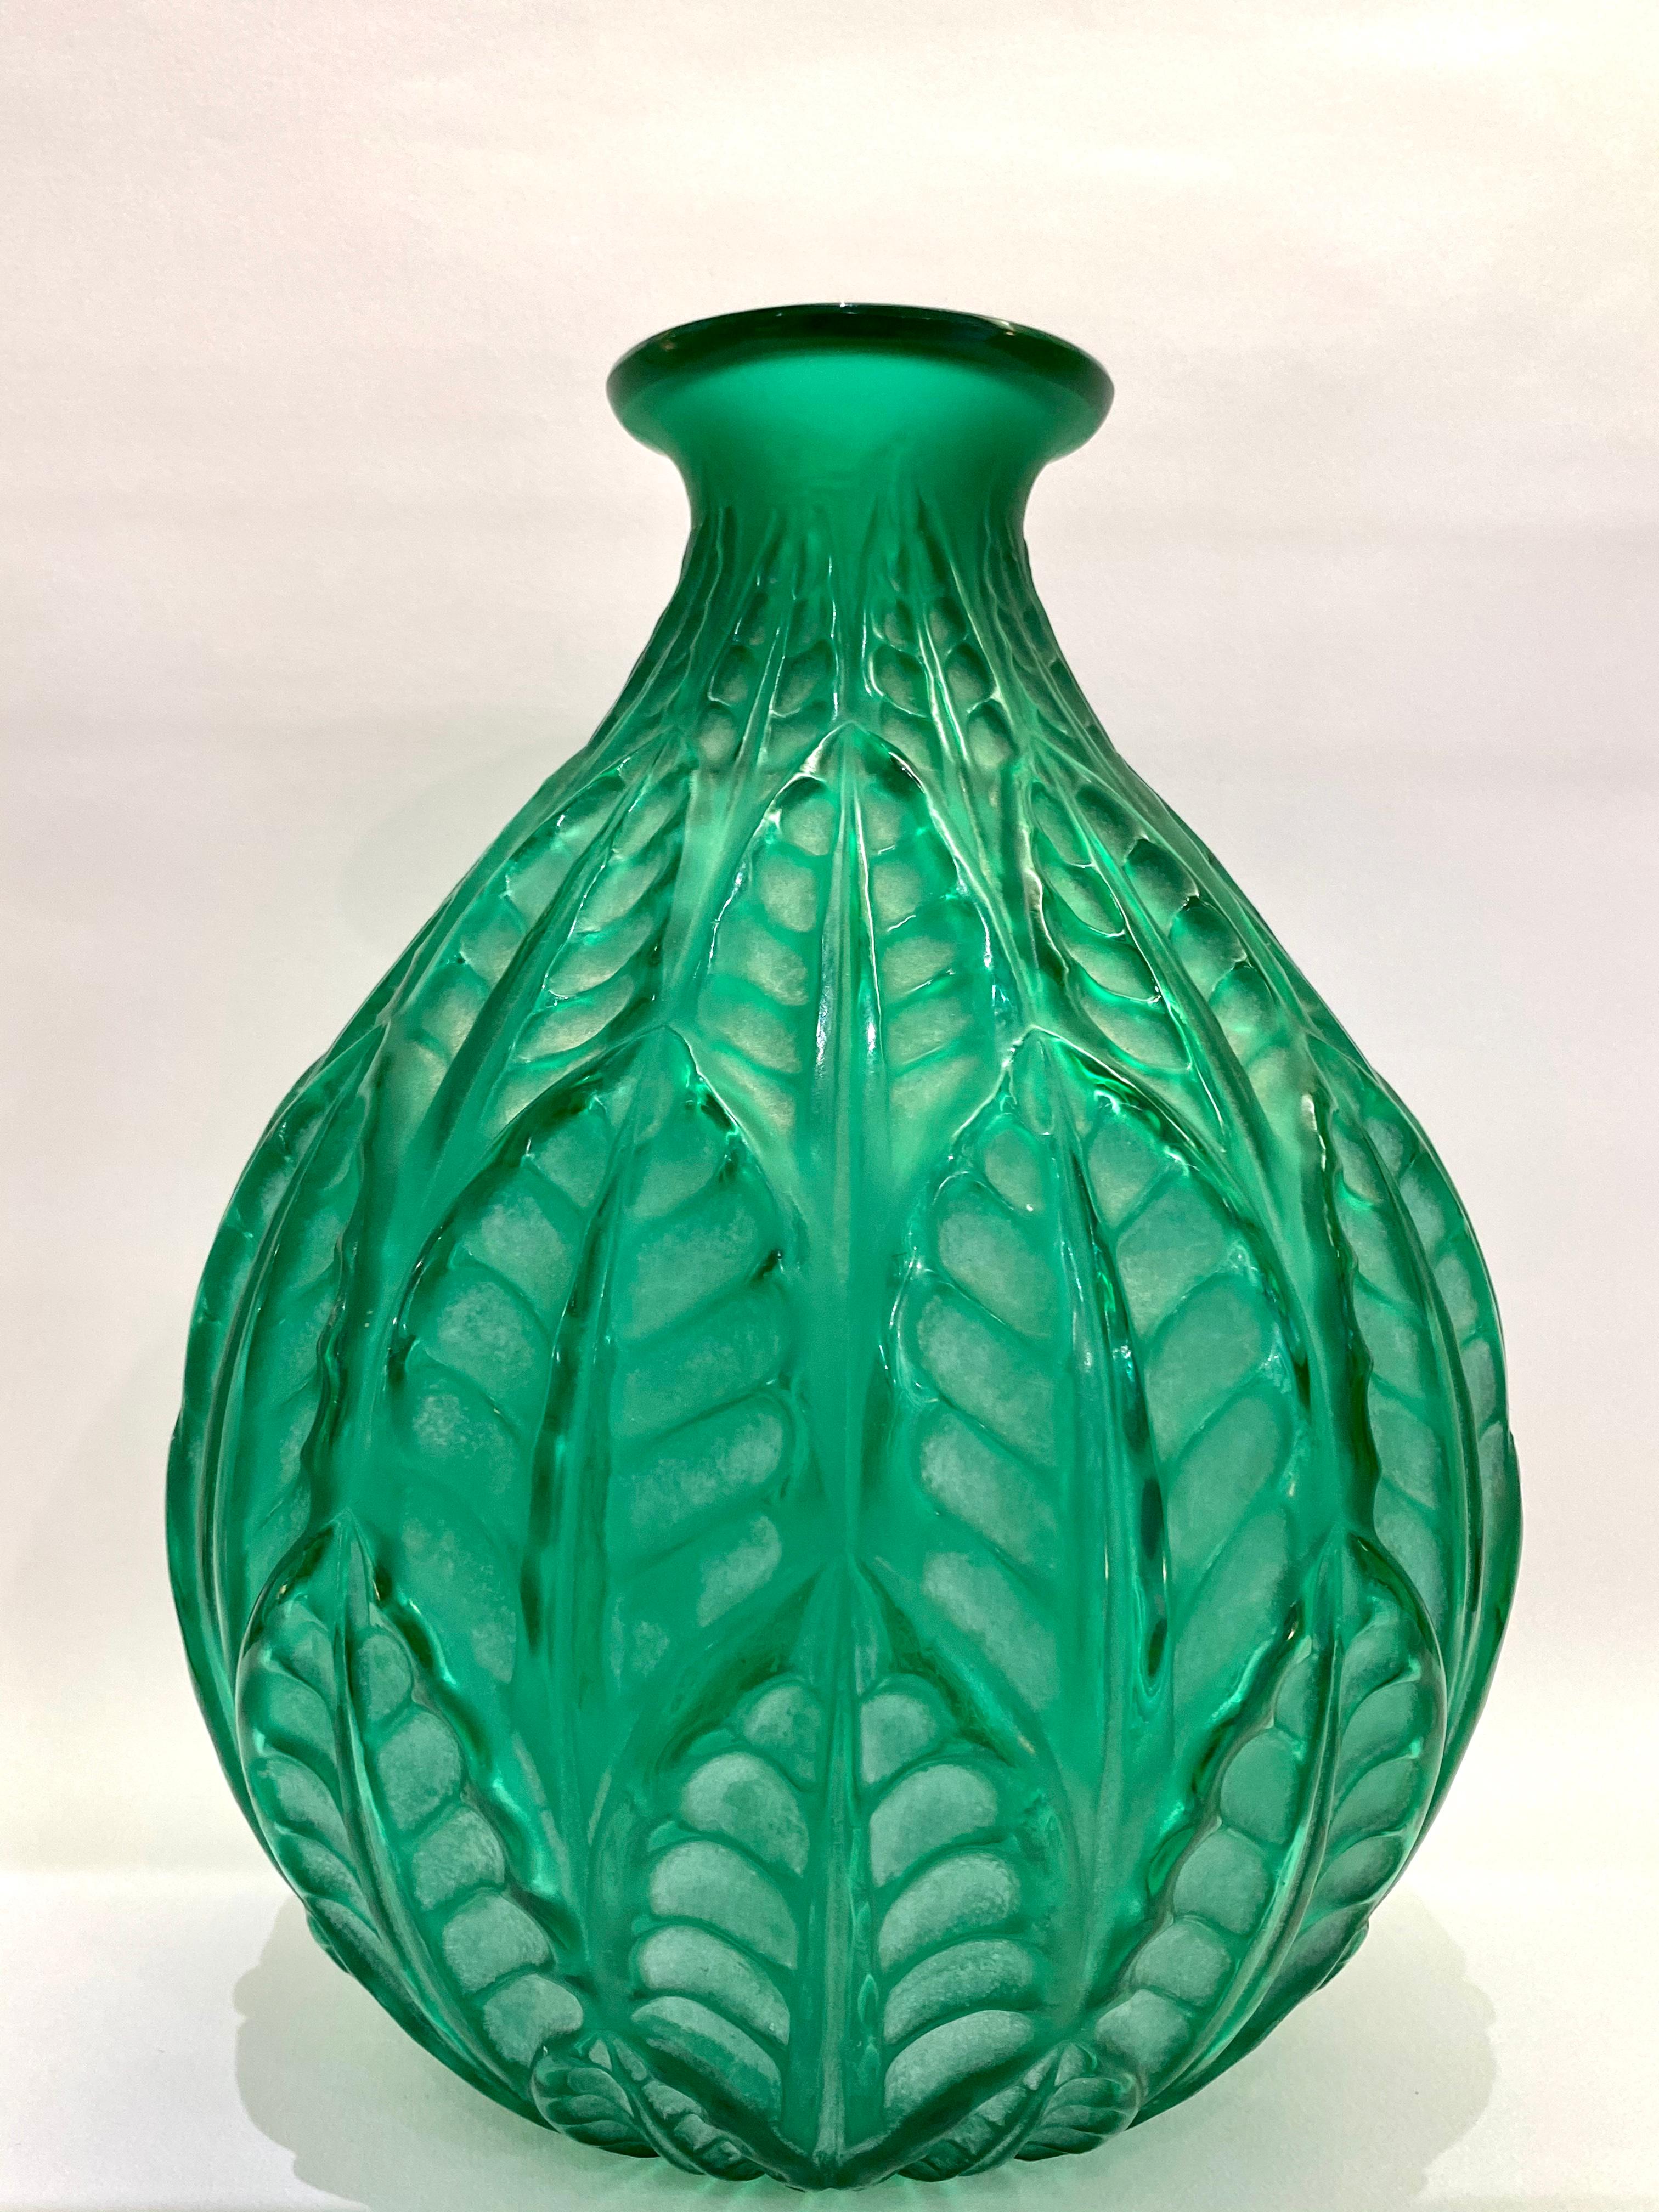 Art Deco 1927 René Lalique Malesherbes Vase in Emerald Green Glass Leaves